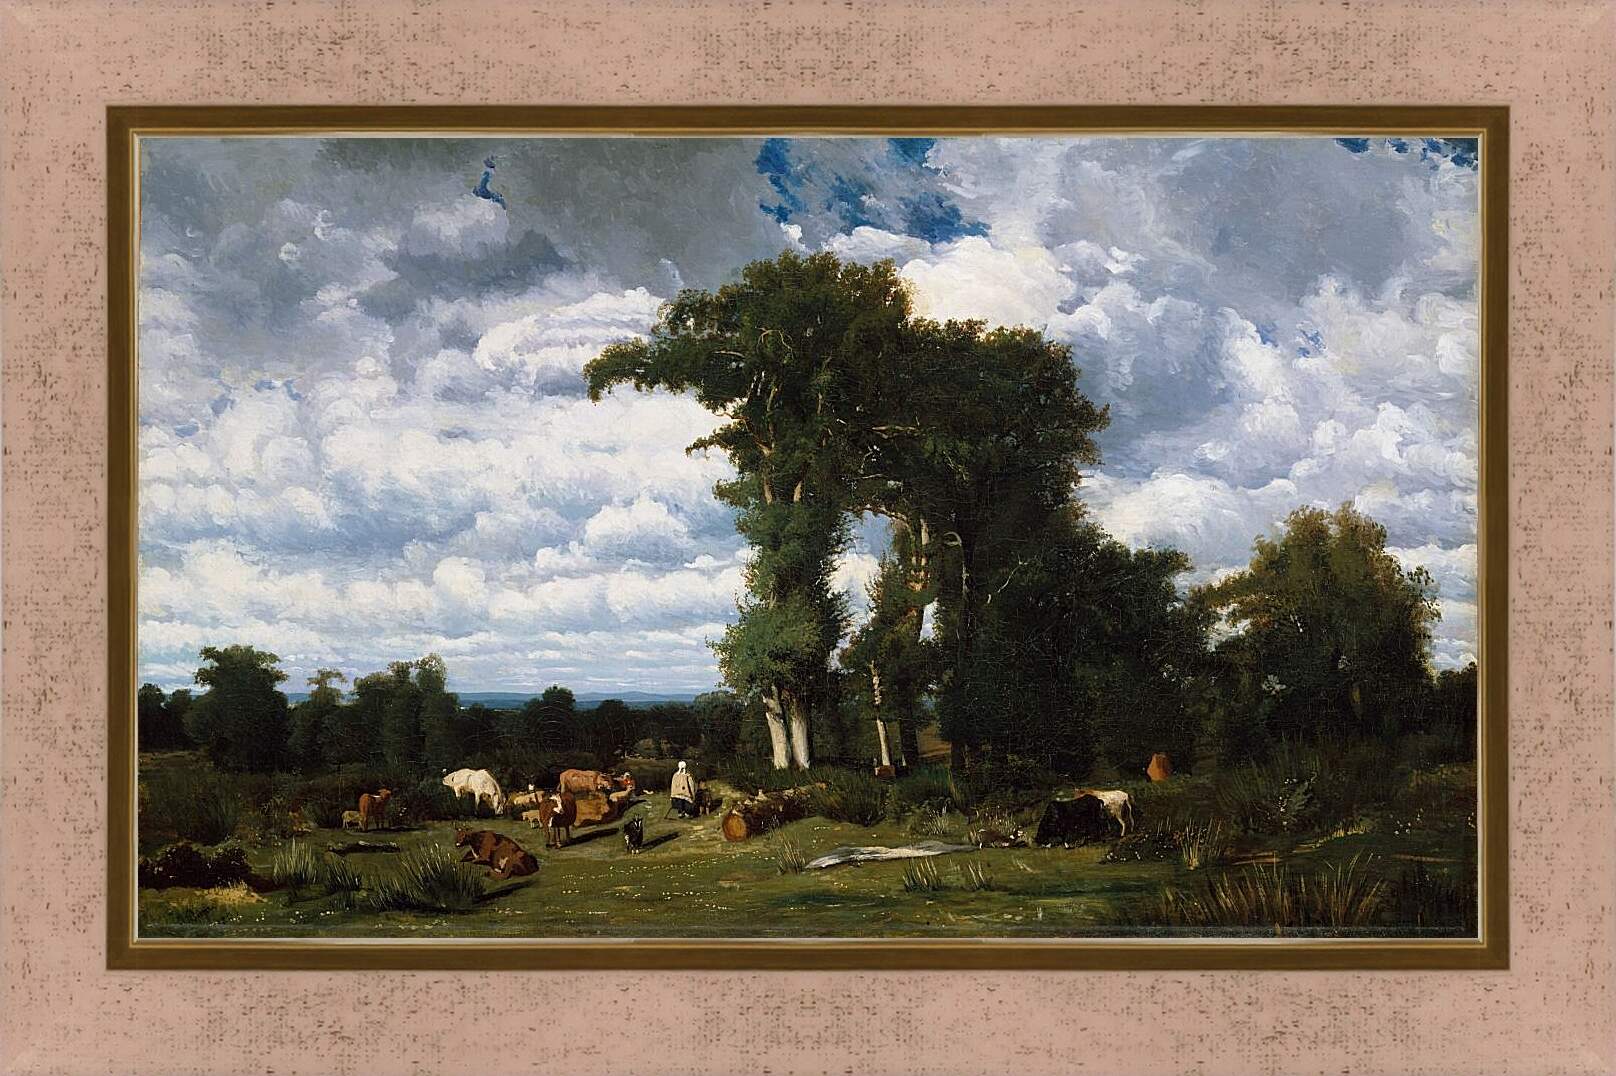 Картина в раме - Landscape with Cattle at Limousin. Жюль Дюпре